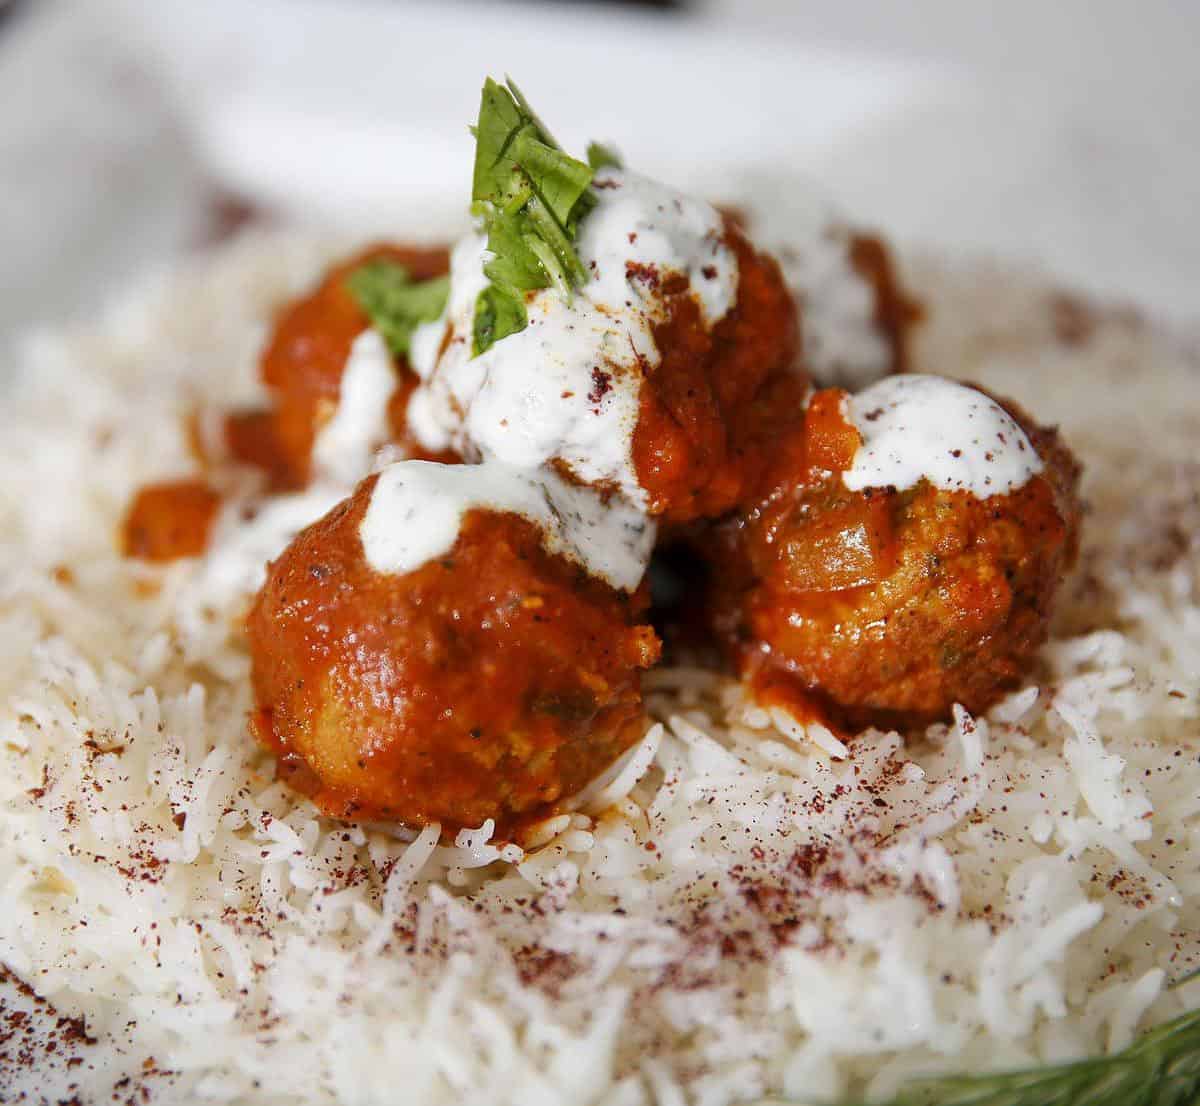  These magic meatballs will have your taste buds spellbound!